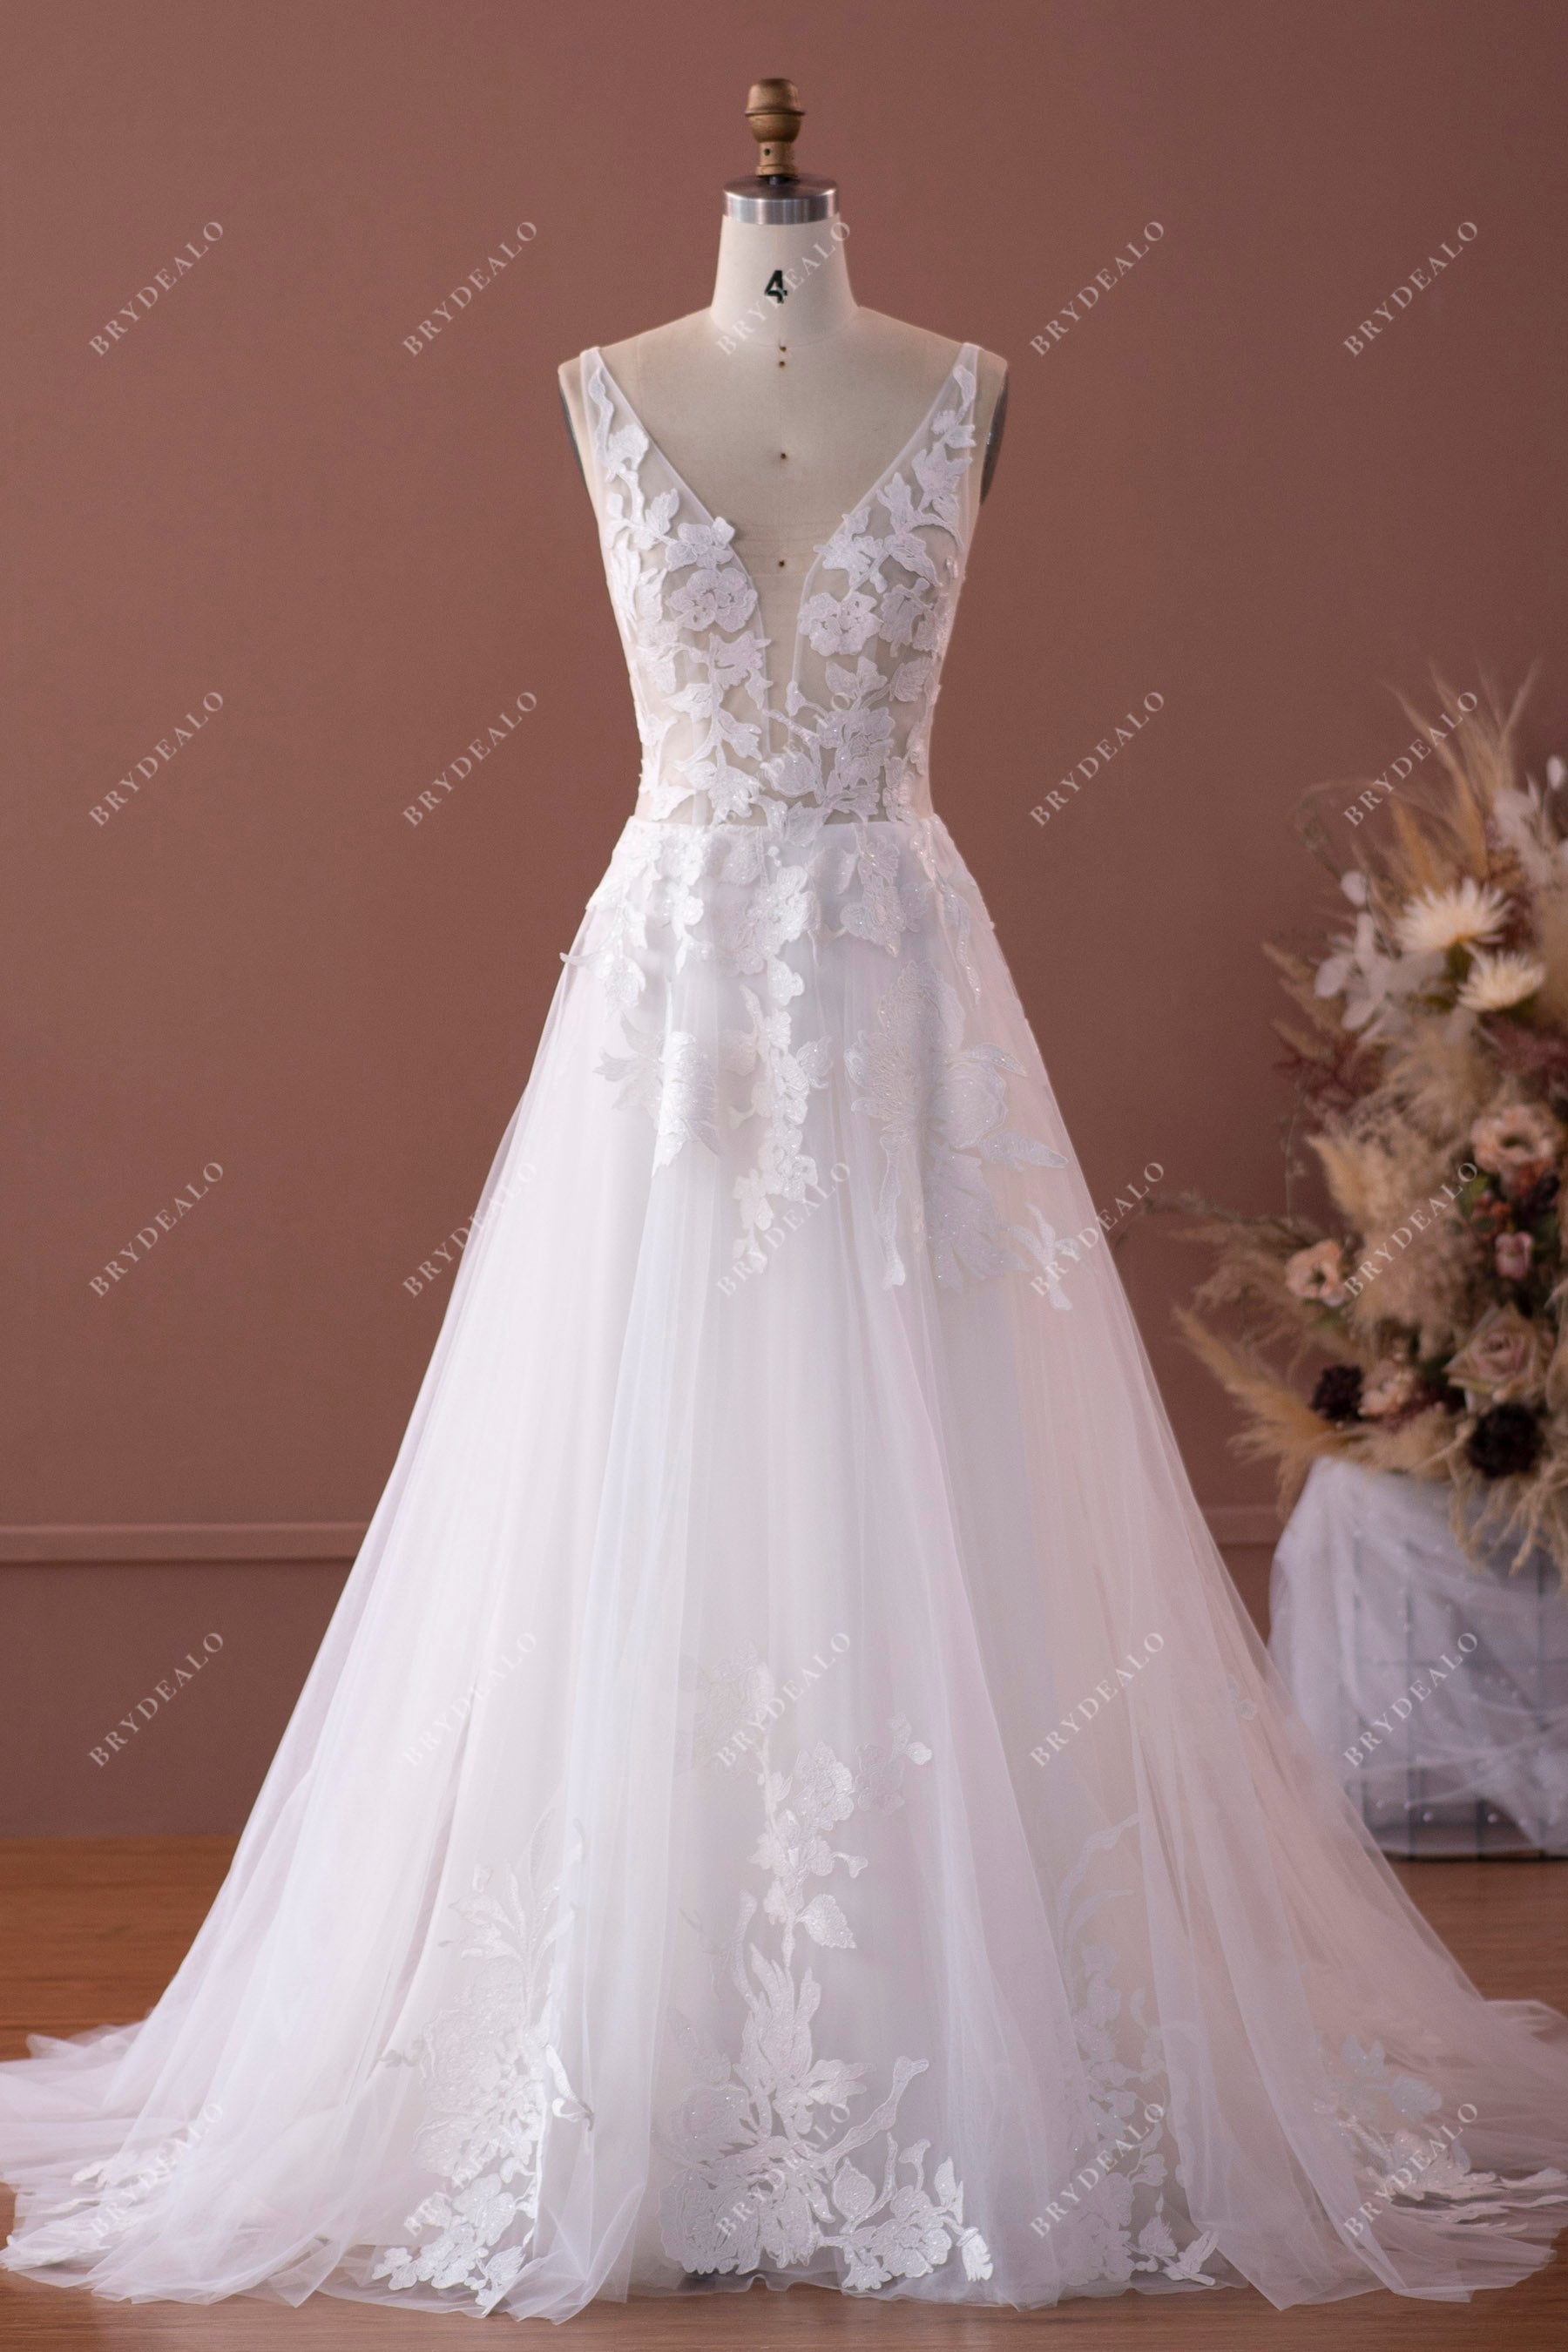 shimmery flower lace plunging A-line wedding dress